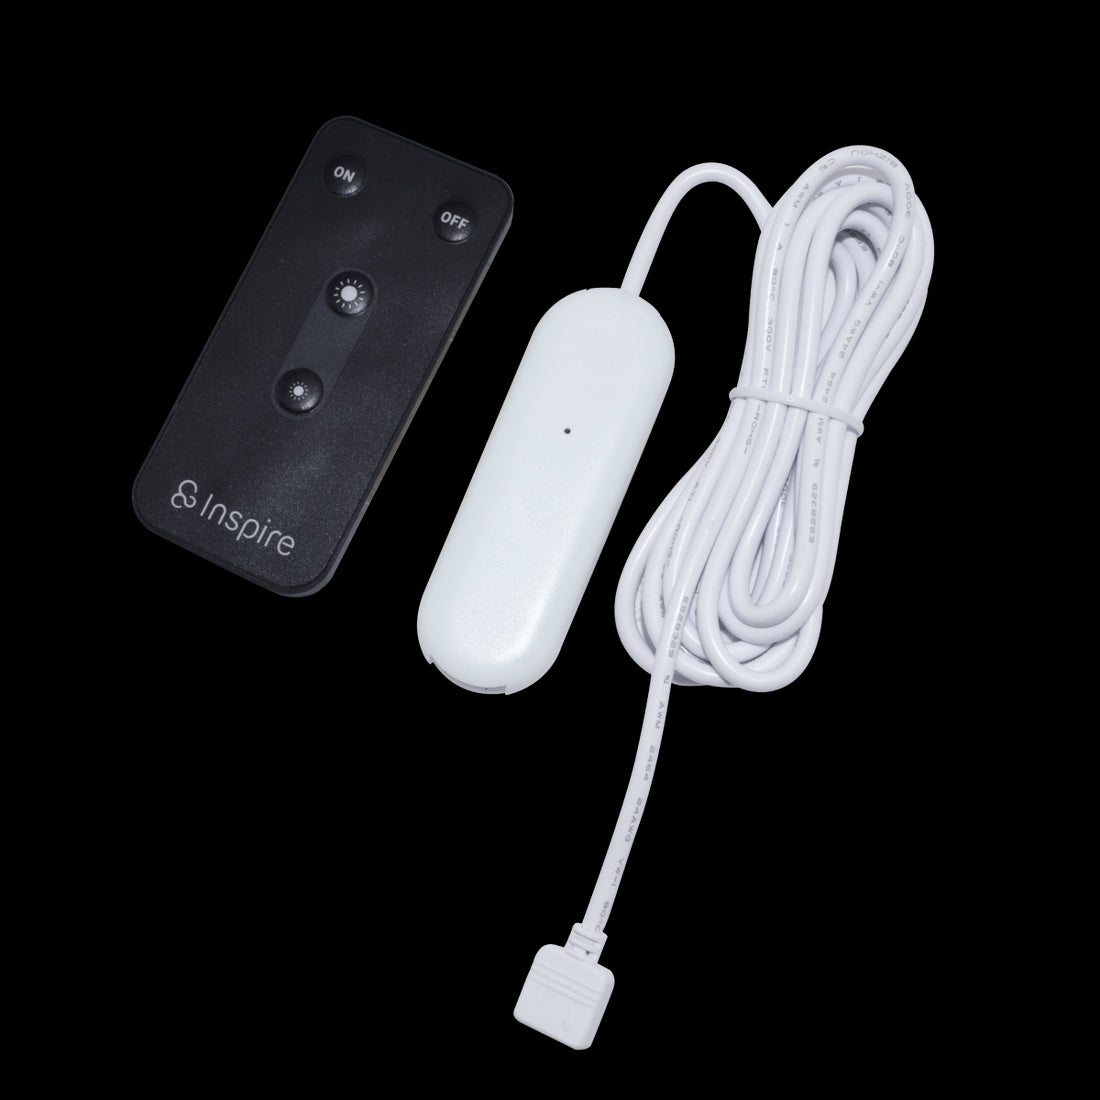 ON-OFF REMOTE CONTROL FOR LED STRIP